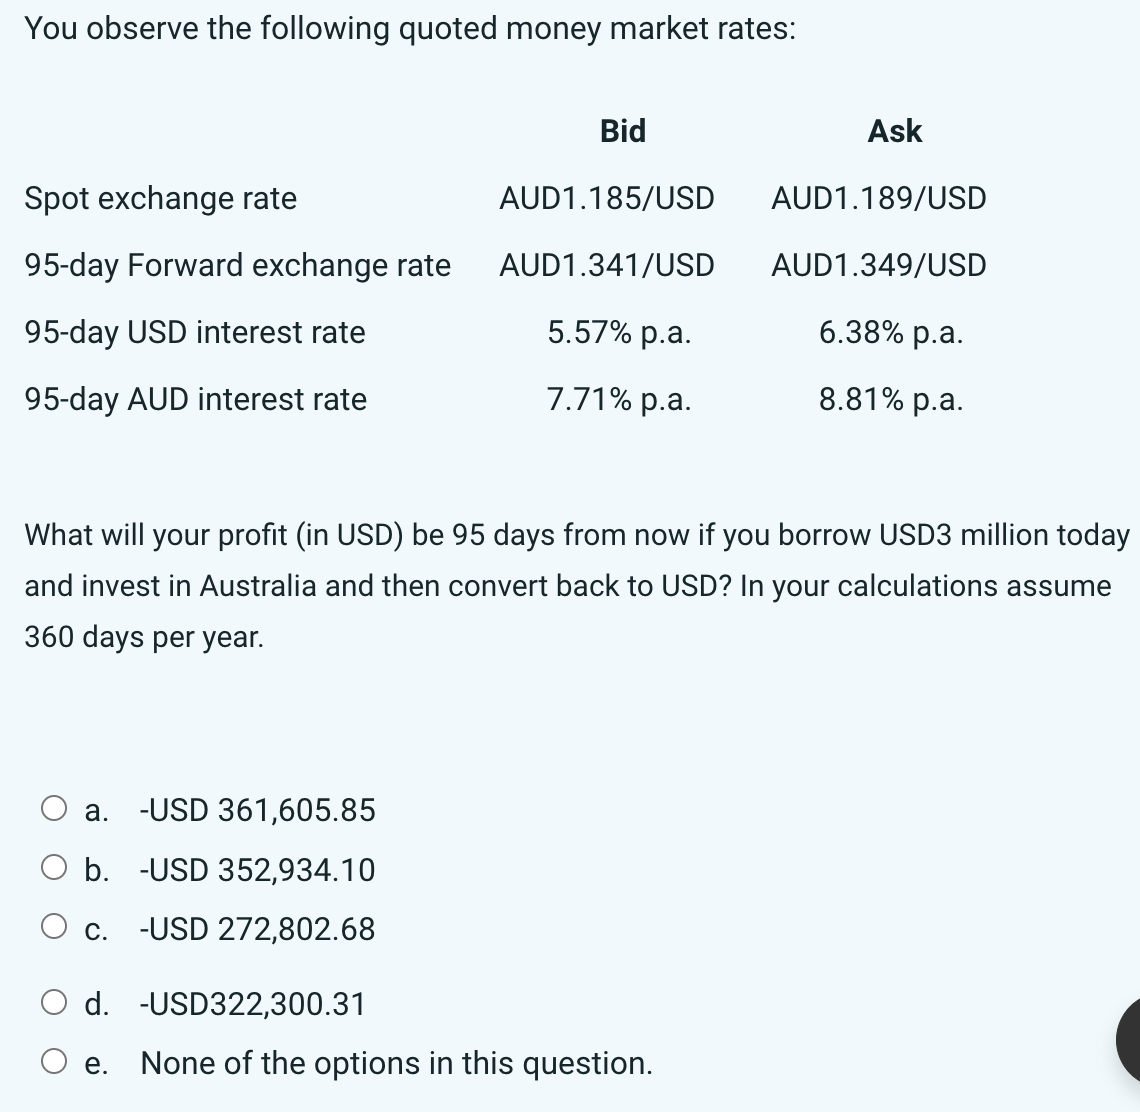 You observe the following quoted money market rates:
Spot exchange rate
95-day Forward exchange rate
95-day USD interest rate
95-day AUD interest rate
What will your profit (in USD) be 95 days from now if you borrow USD3 million today
and invest in Australia and then convert back to USD? In your calculations assume
360 days per year.
a. -USD 361,605.85
b. -USD 352,934.10
-USD 272,802.68
Bid
Ask
AUD1.185/USD AUD1.189/USD
AUD1.341/USD
AUD1.349/USD
5.57% p.a.
6.38% p.a.
7.71% p.a.
8.81% p.a.
O c.
O d.
-USD322,300.31
O e. None of the options in this question.